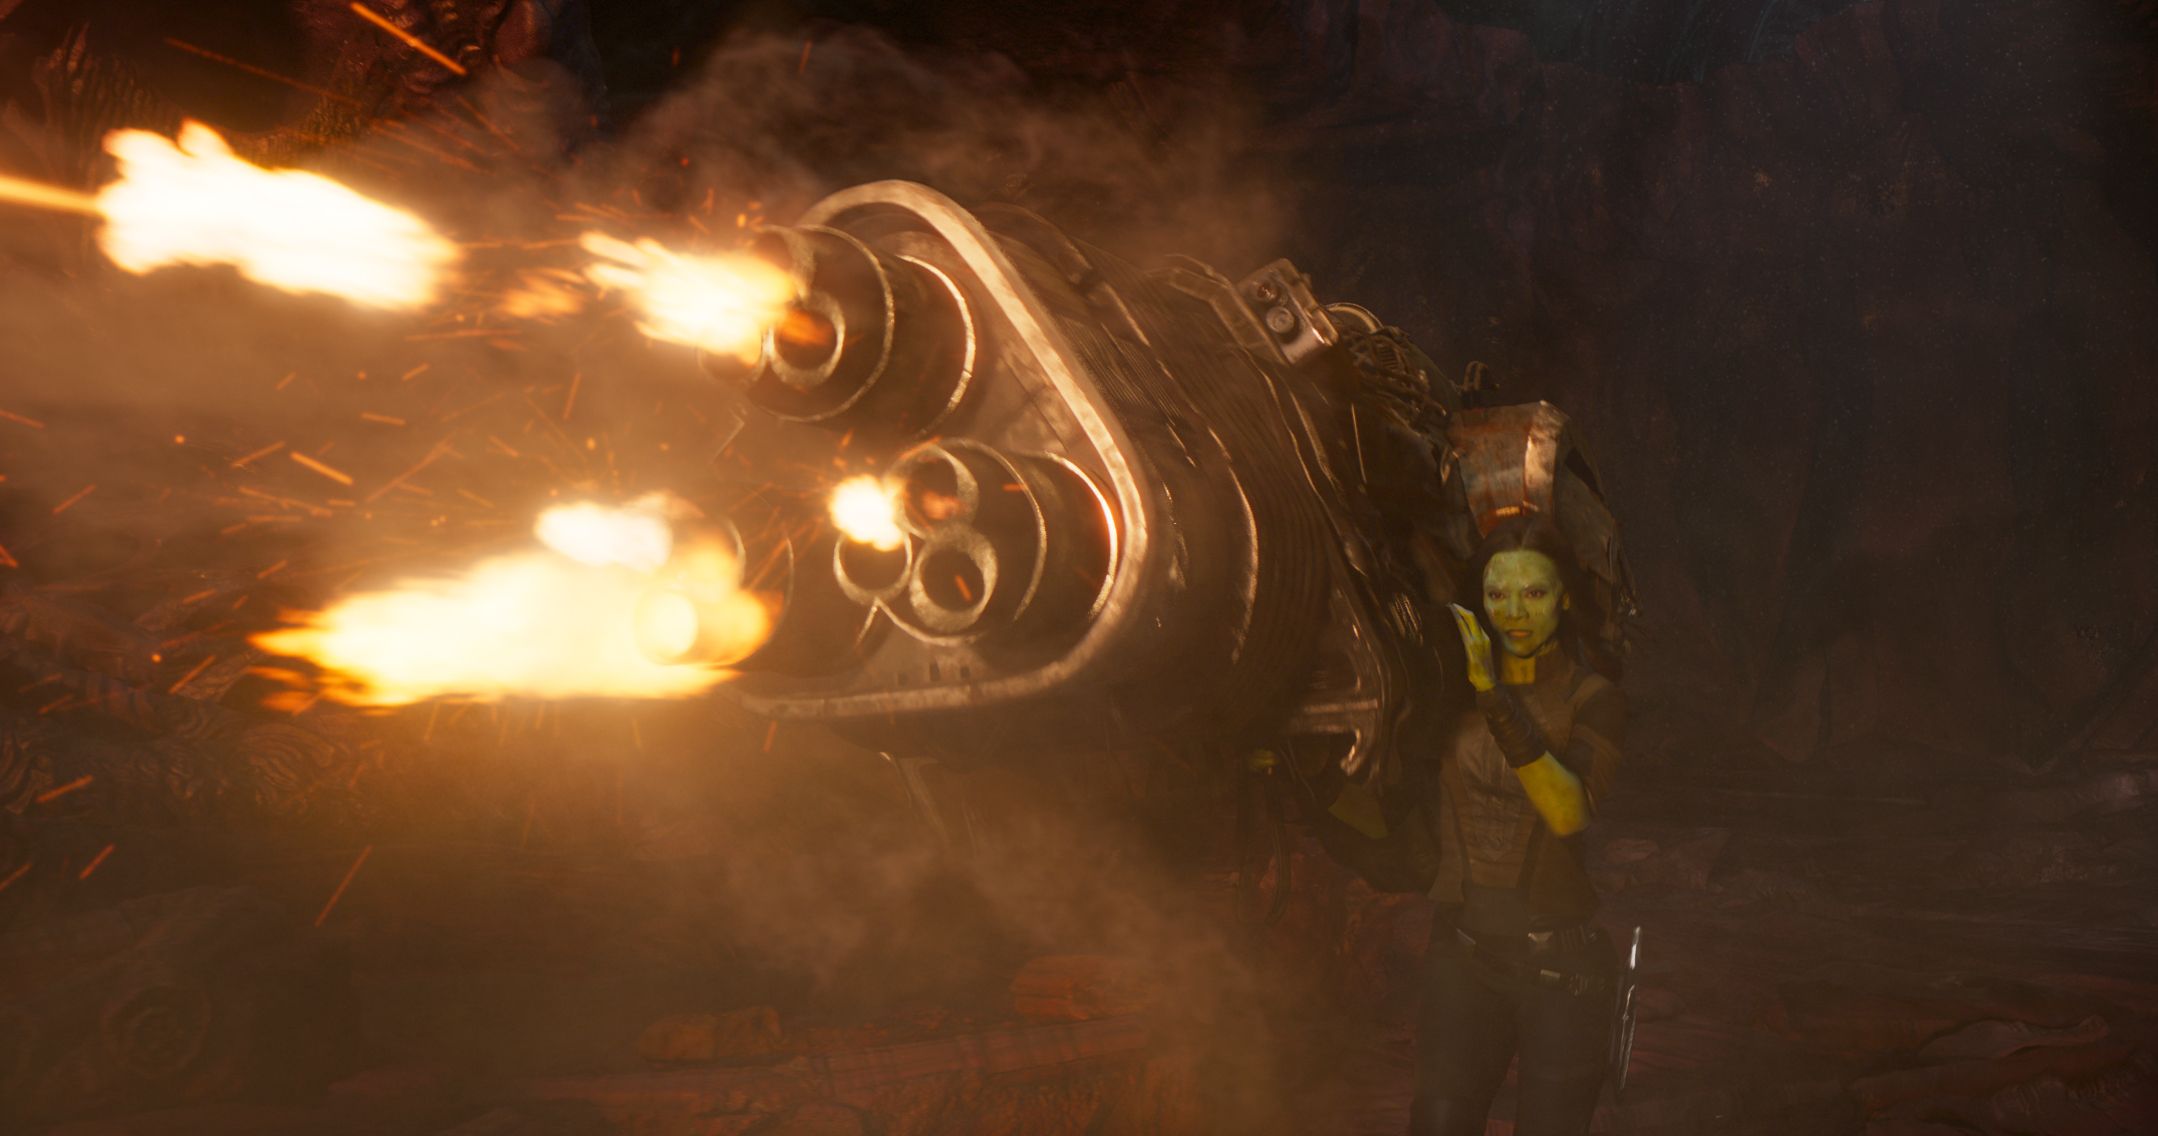 Gamora uses a gun larger than she is in Guardians Of The Galaxy Volume 2